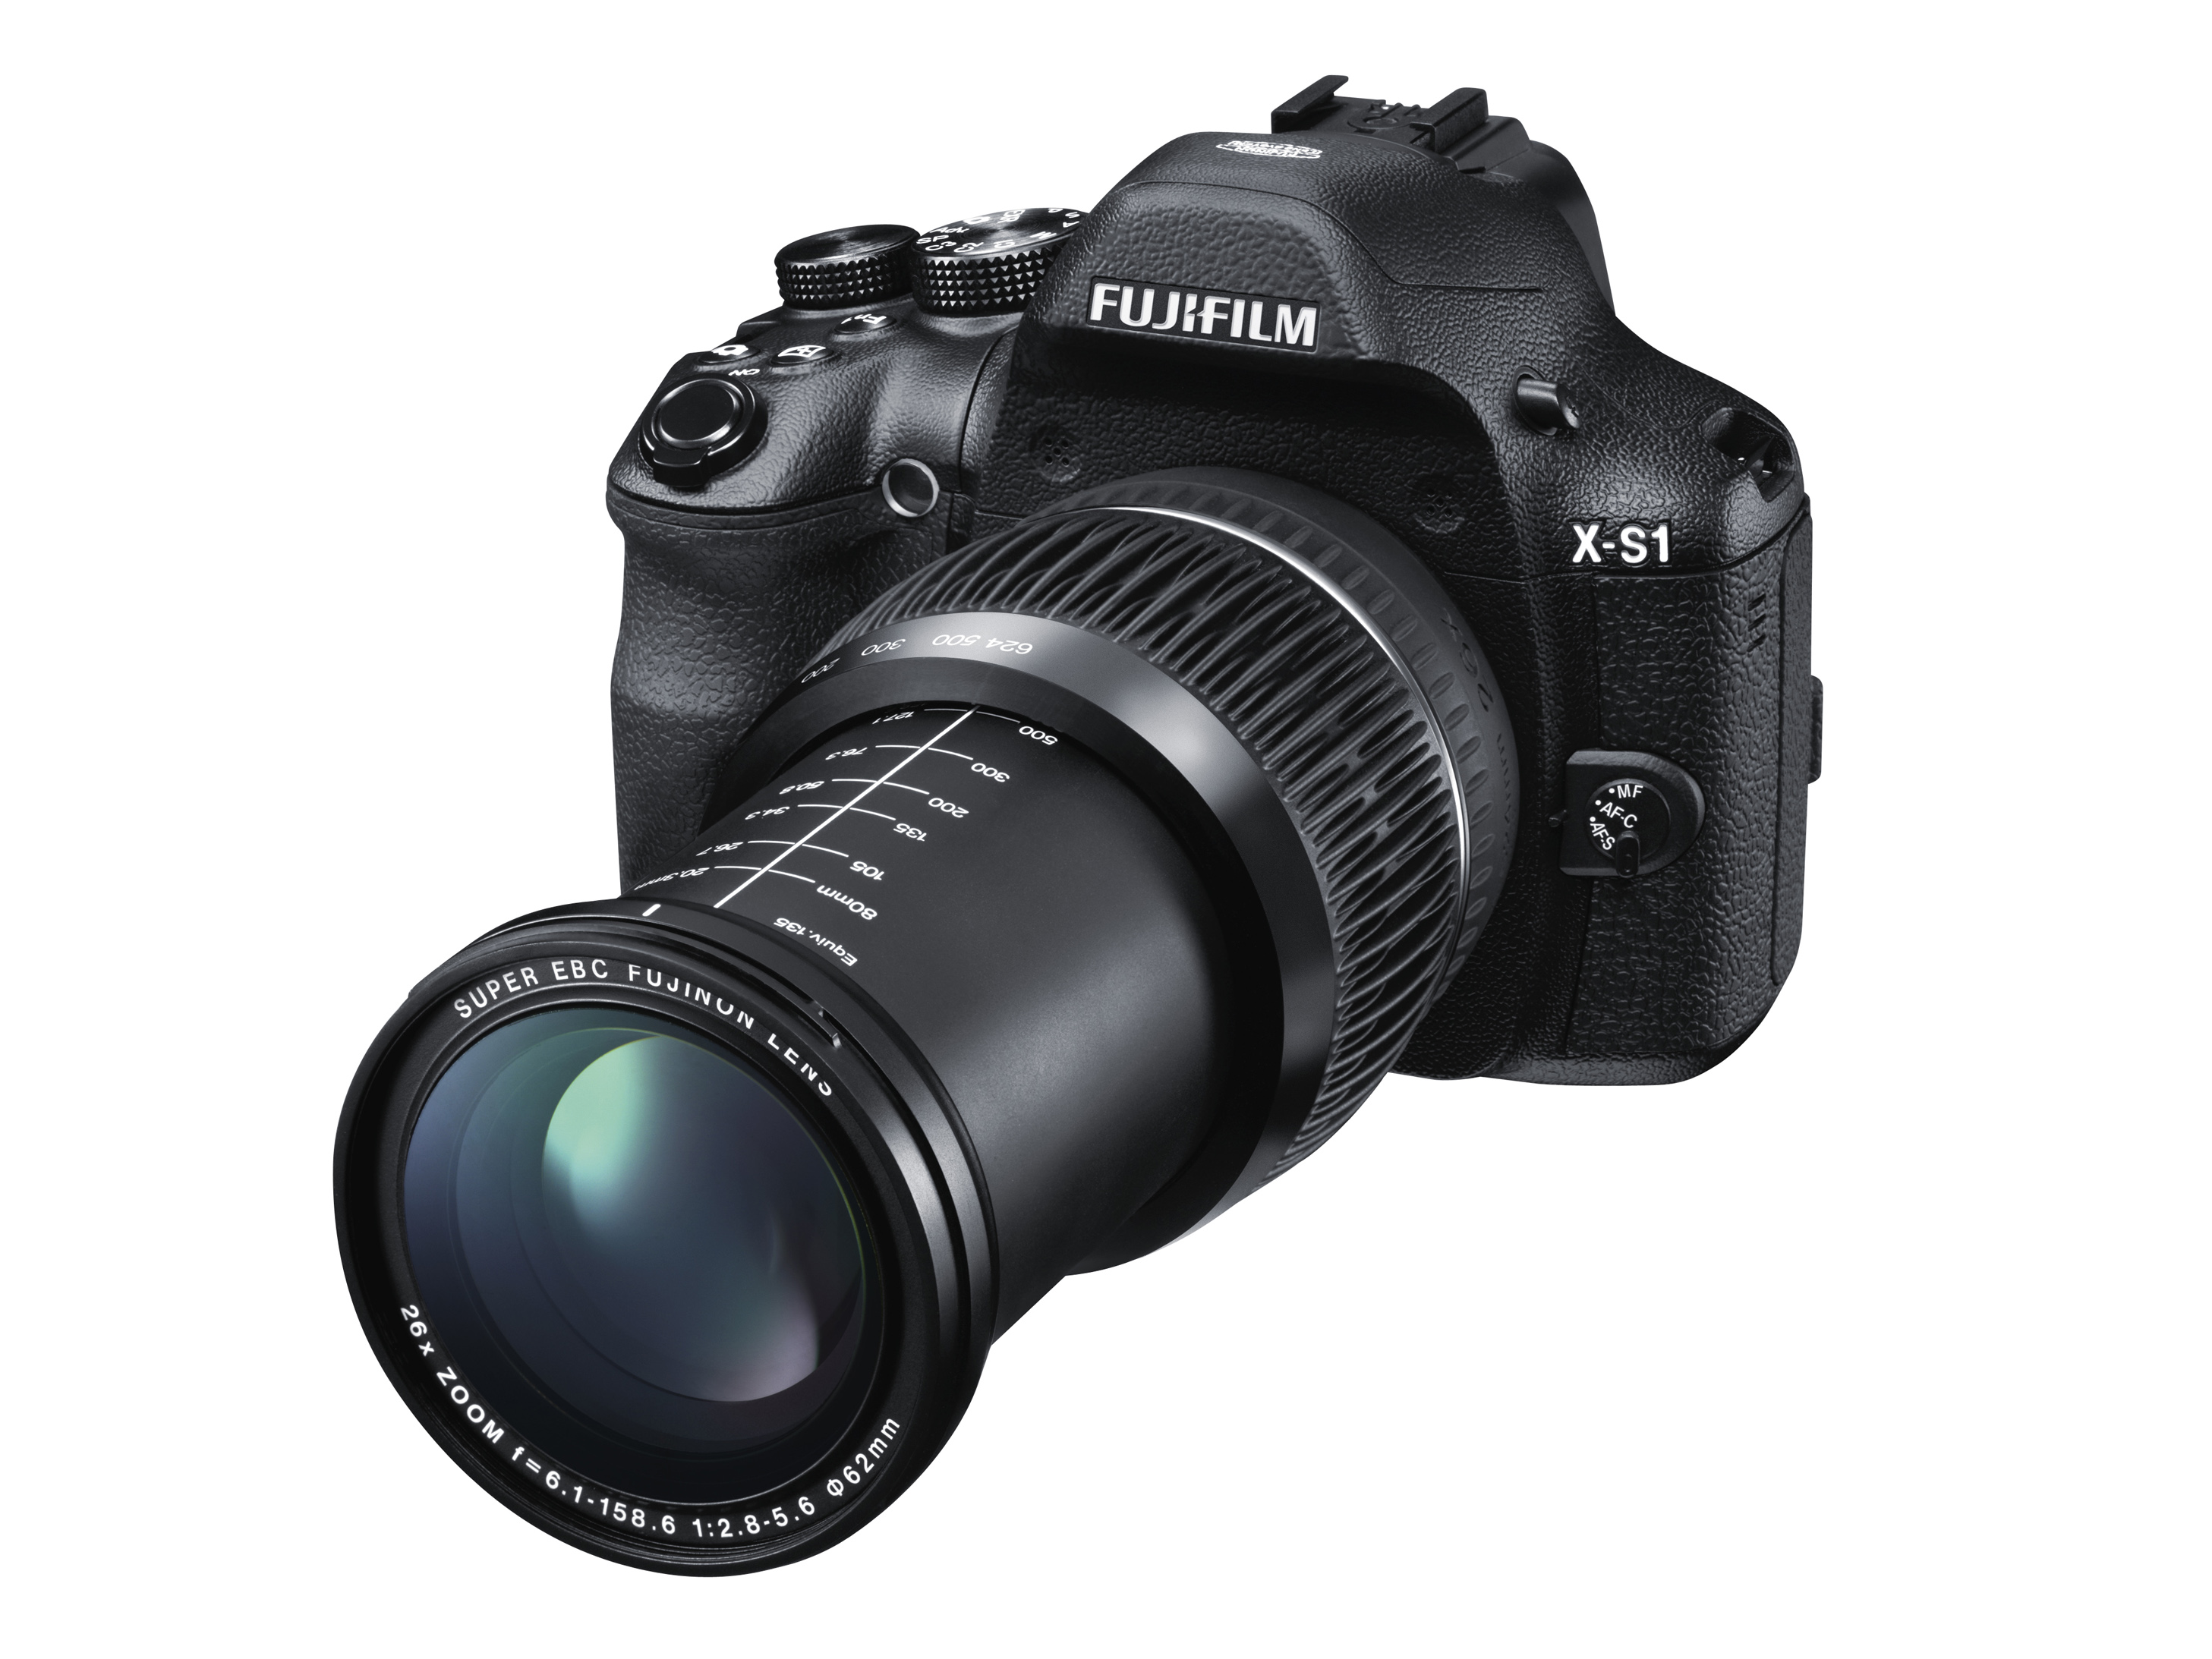 http://thetechjournal.com/wp-content/uploads/images/1201/1325741213-introducing-with-fujifilms-new-xseries-camera-xs1--2.jpg